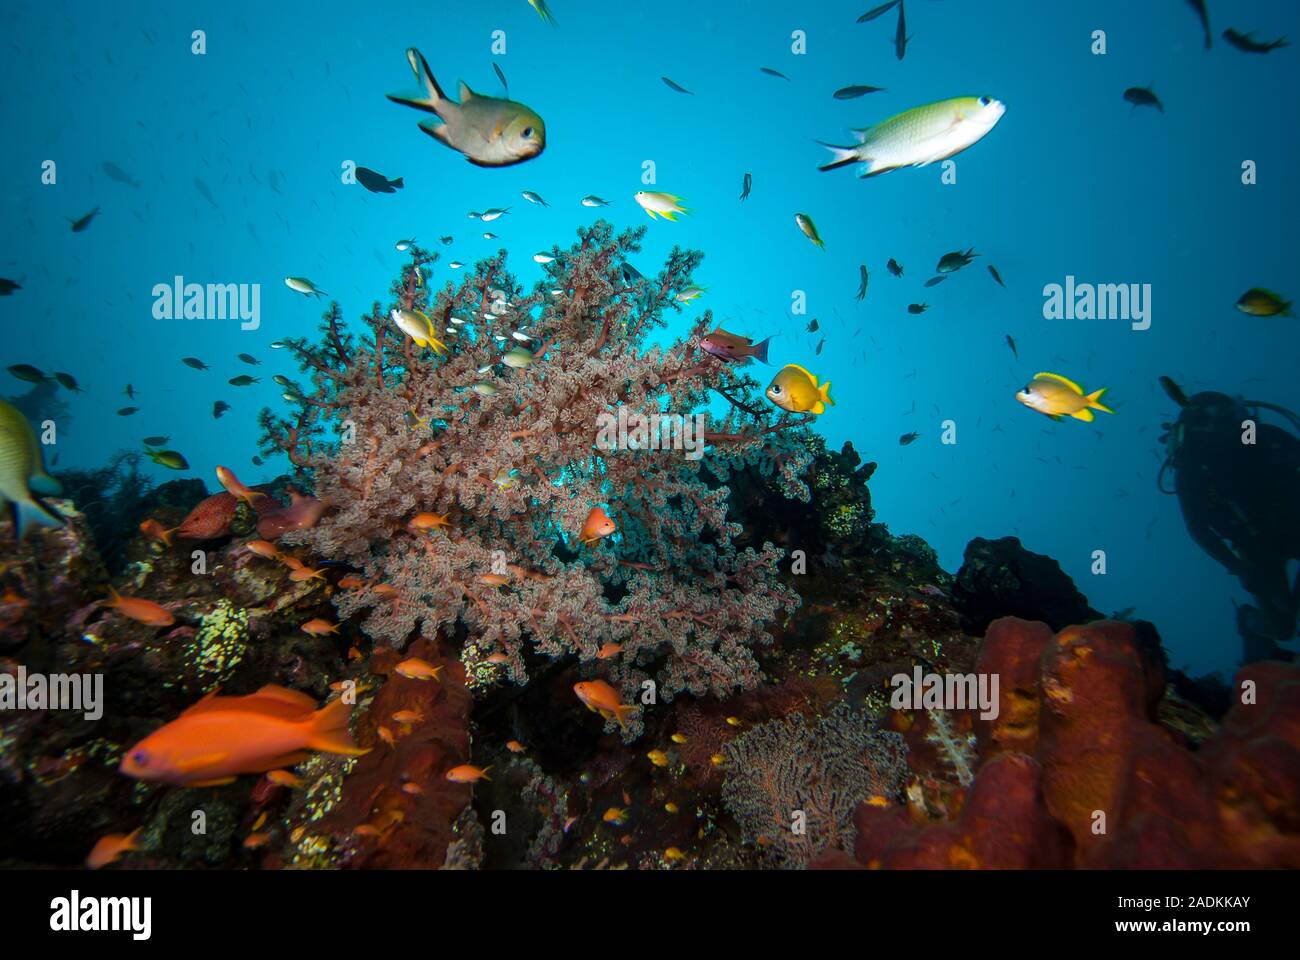 Tropical marine biodiversity in the Indonesian Coral Triangle. Coral Reef Underwater Landscape Stock Photo